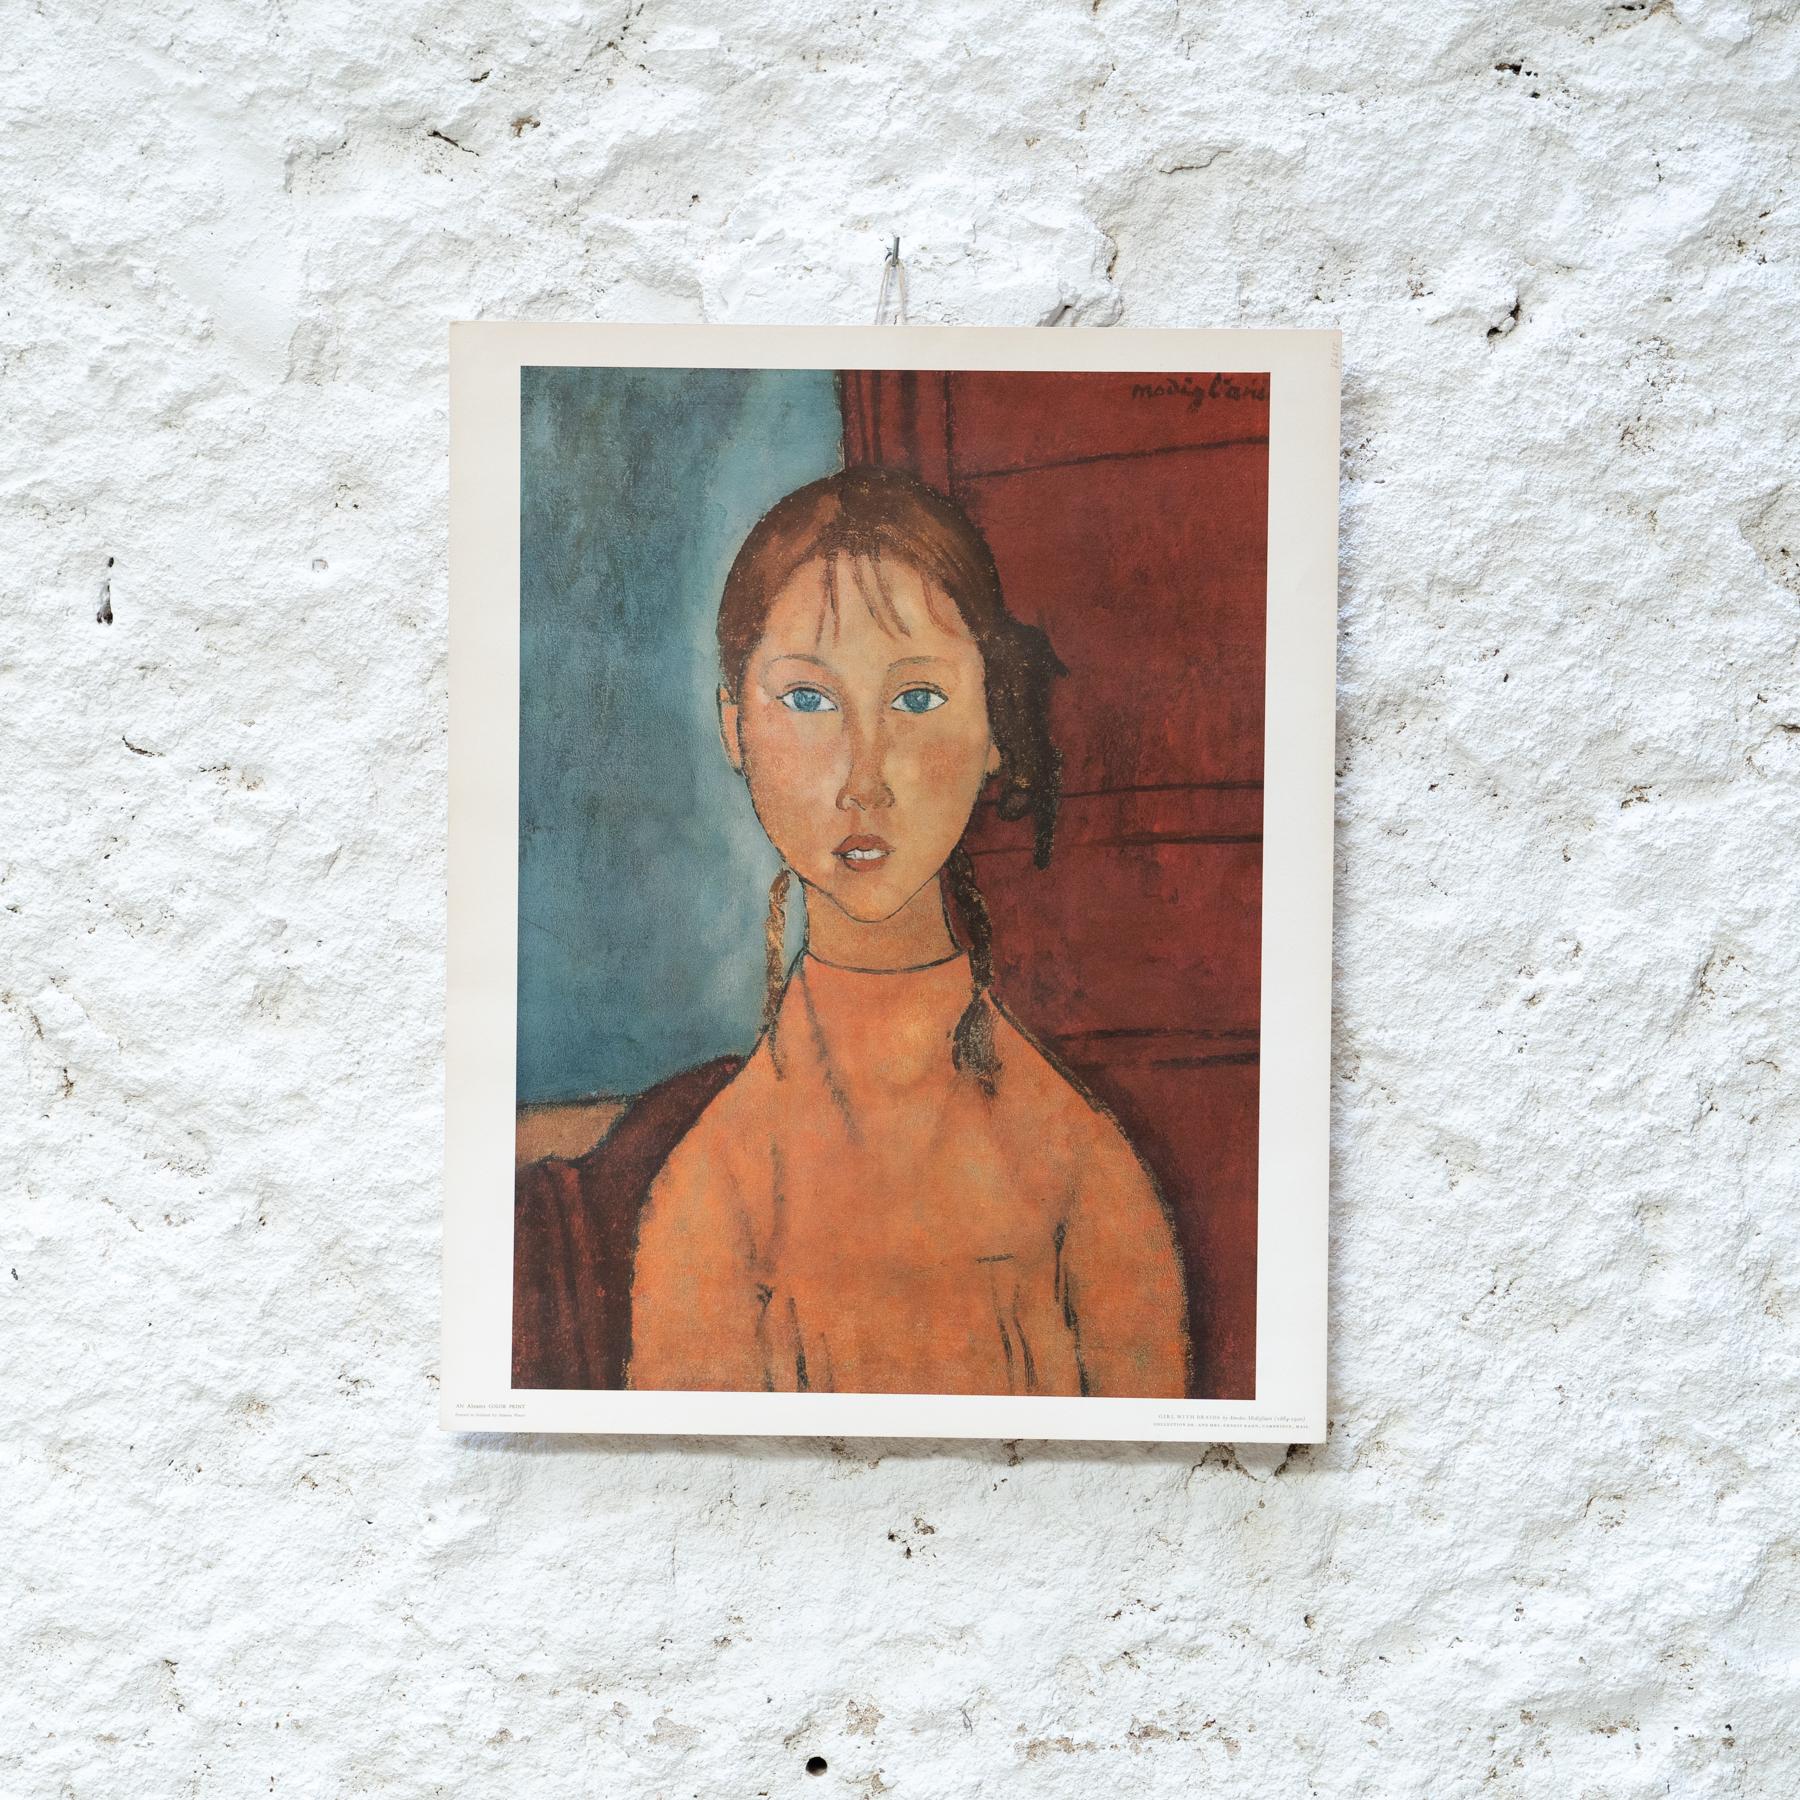 Modigliani Amadeo “Girls with Braids” Abrams Print, circa 1970

An Abrams Color Print, 

Printed in Holland by Smeets Weert.

In original condition, with minor wear consistent of age and use, preserving a beautiful patina